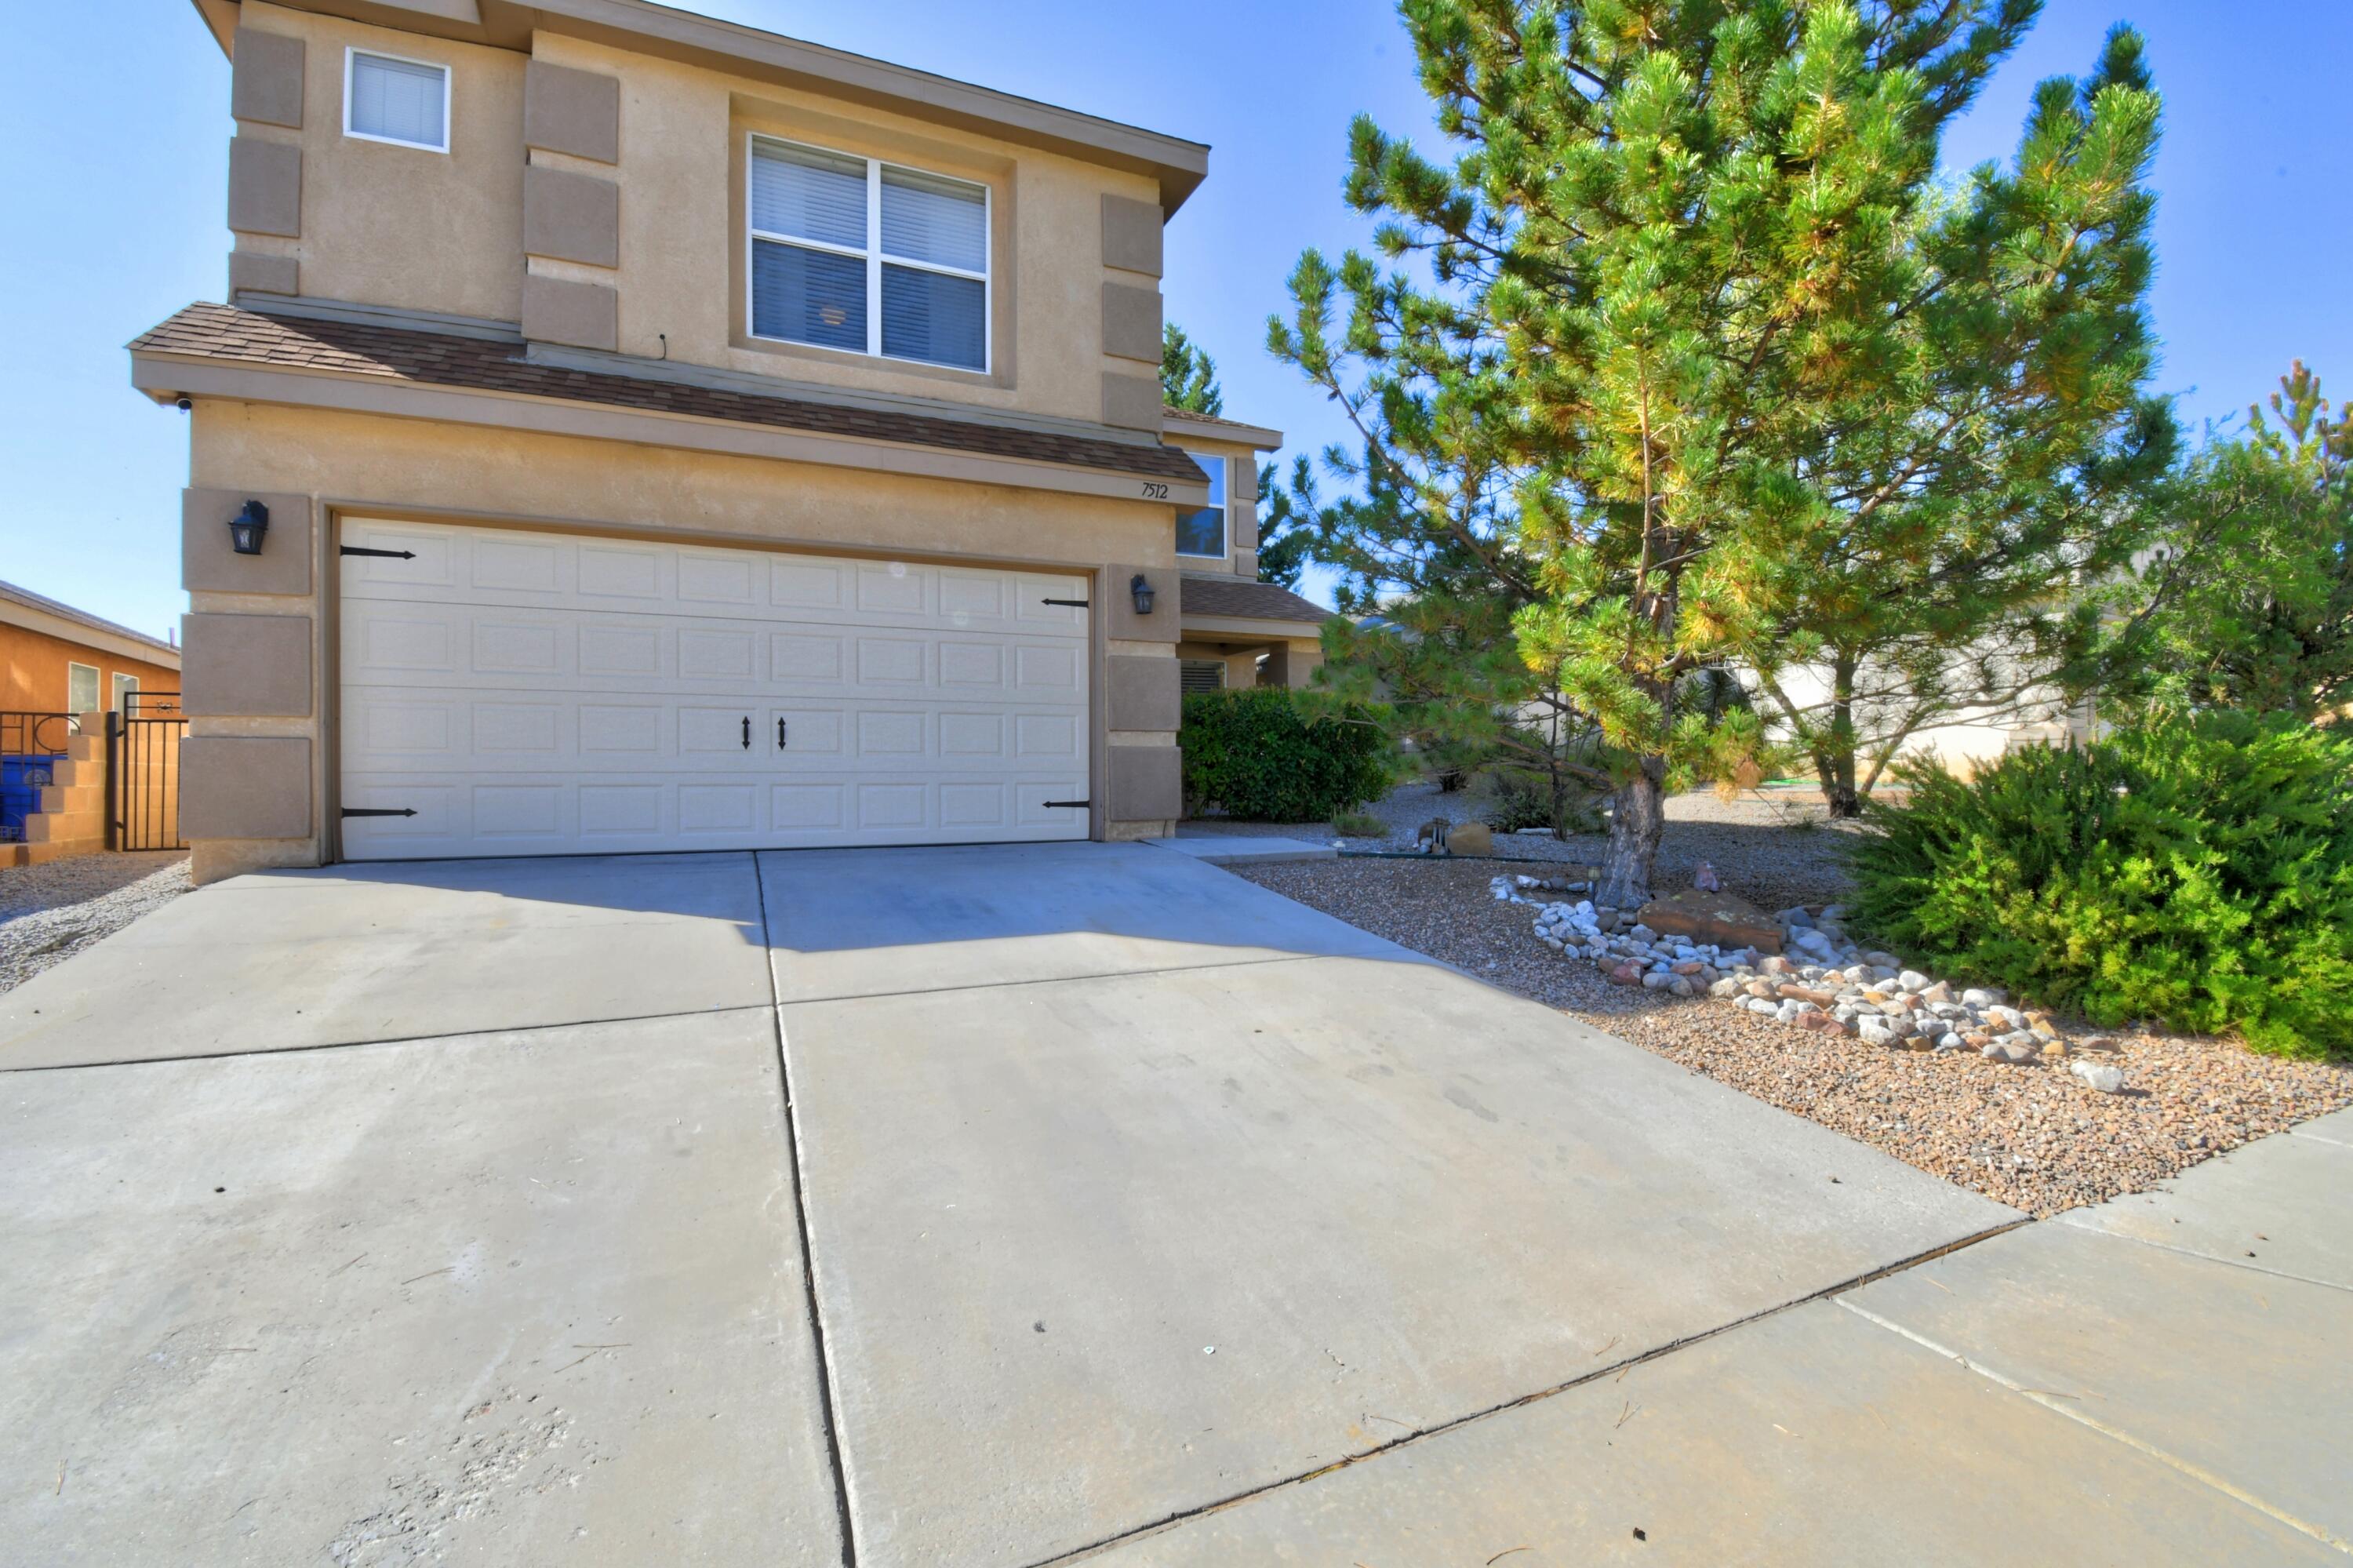 Open Houses October 1 & October 2, 2022.One Owner Home in a Great, Quiet Ventana area. Roof, Garage Door & Dishwasher replaced 2022. Cheerful eat-in Kitchen w/Pantry, Stainless & Black appliances & is open to family room + Formal Dining. Generous Primary Bedroom & 10x11 Loft.Carpet upstairs-2020-No carpet downstairs.BY has Southwest Covered Patio, 8x10 Tuff Shed & raised Block Wall w/Trees-Private too! No 2 story looking down on this BY! Ready for grass or rock.  Elect boxes installed for Hot Tub & one for fountain.Trendy Schools:Volcano Vista High & Tony Hillerman.Paved Walking/Biking Trails/Community Dog RunsLighted Park/Community Swimming PoolHOA Lighted Park, Fields, Picnic Areas & Pool.Extra flooring tile boxes for You.